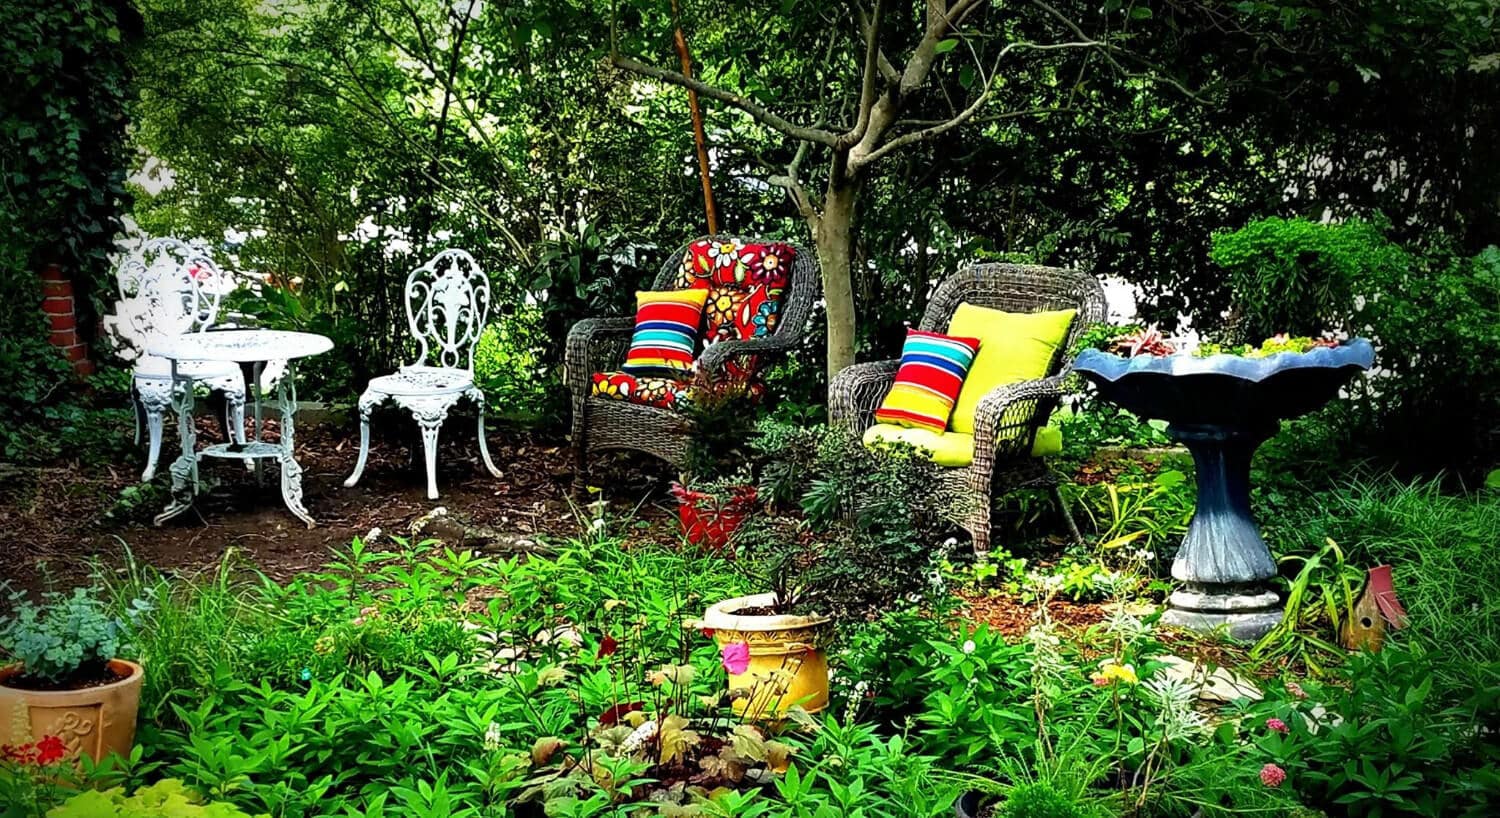 Outdoor seating area with wicker chairs and bright cushions. 